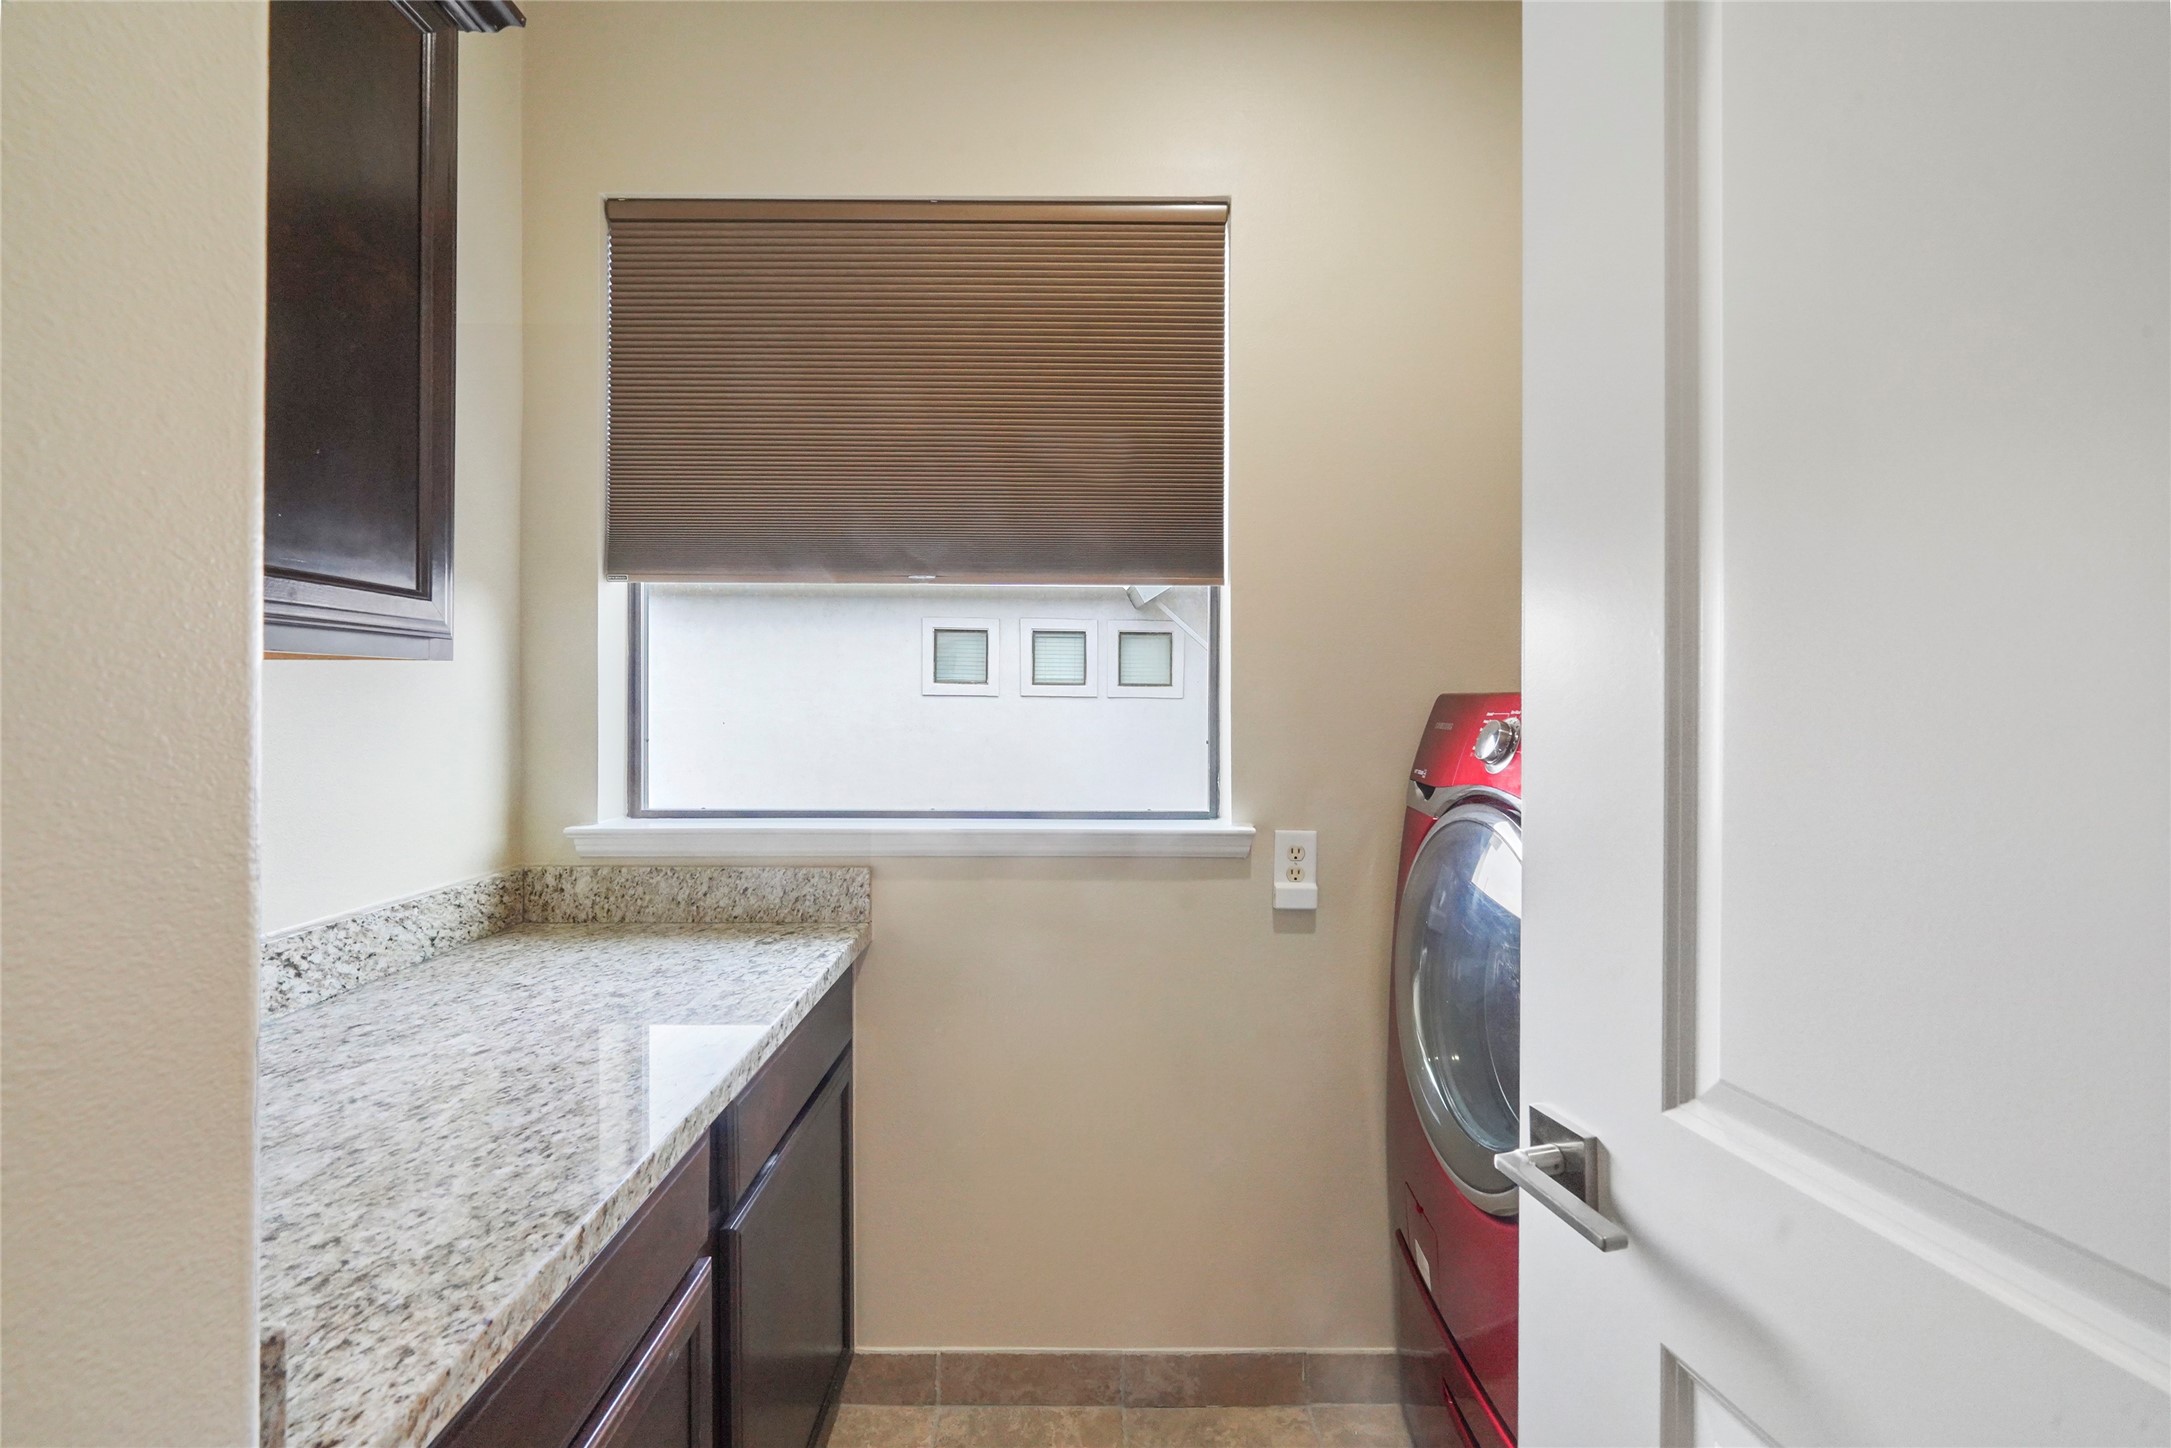 Walk-in laundry room with upper and lower storage.